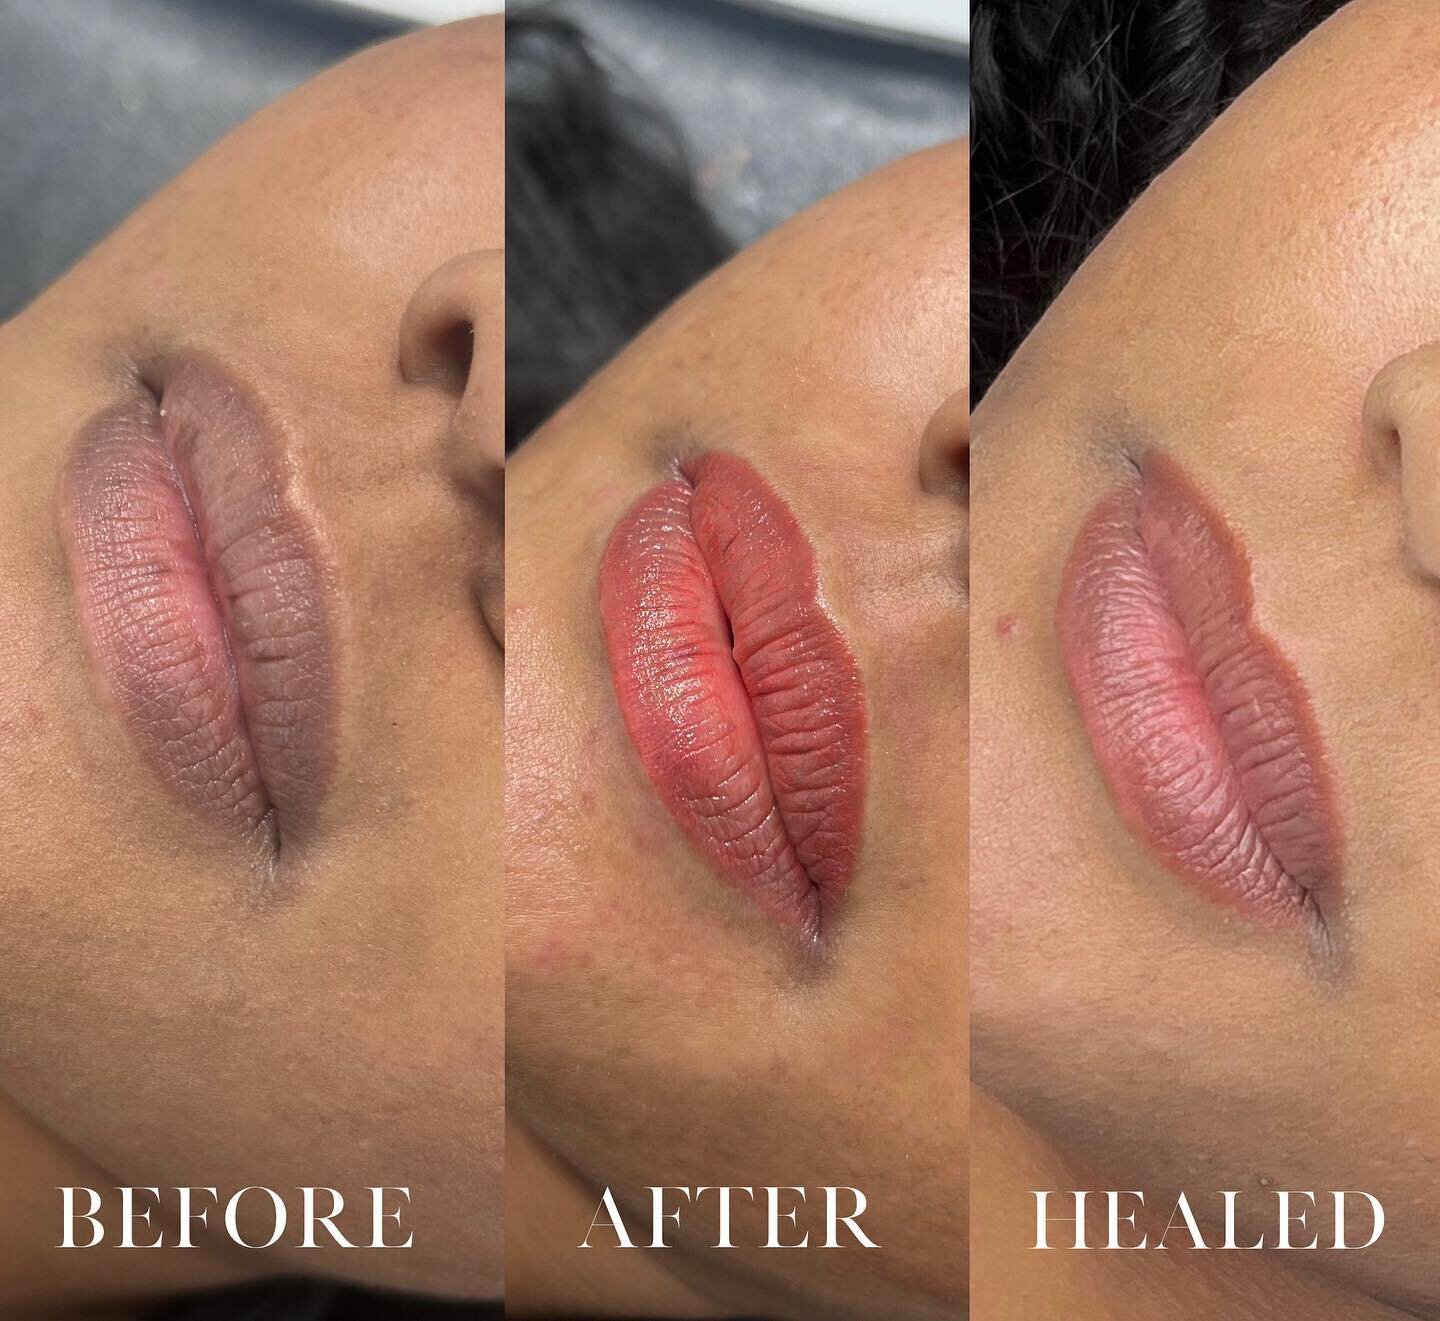 Lip Blush Neutralization after 1 session! I am so happy with these beautiful results so far!! For this client we will require 1-2 more sessions in order to lighten the lips even more and give her the pinky tones she wants!! We will definitely continu